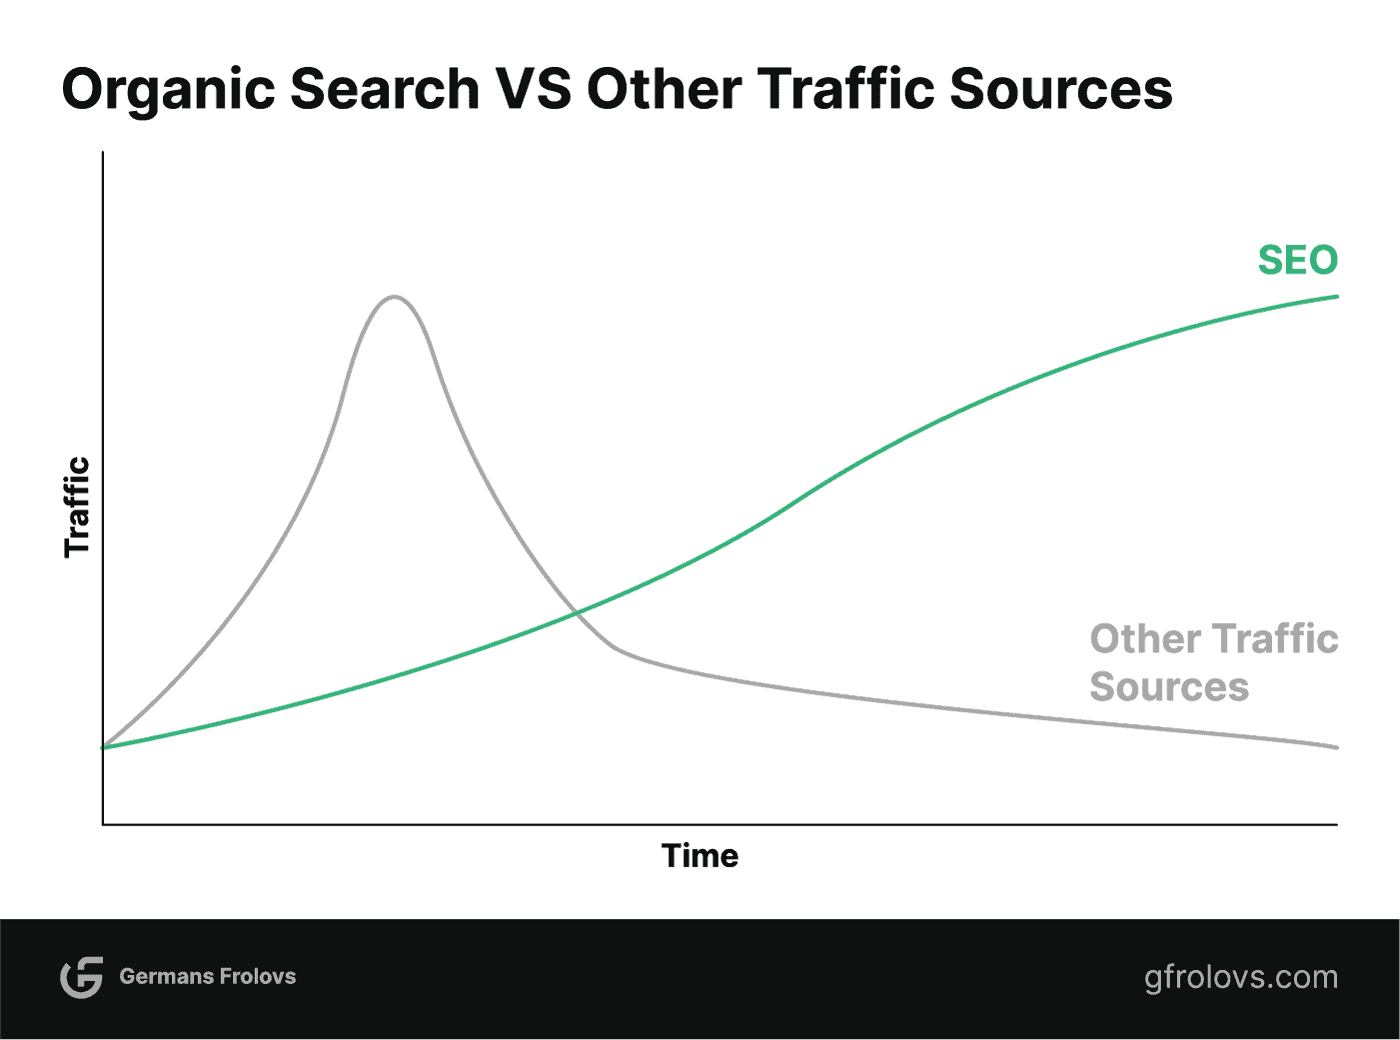 Organic search vs other traffic sources